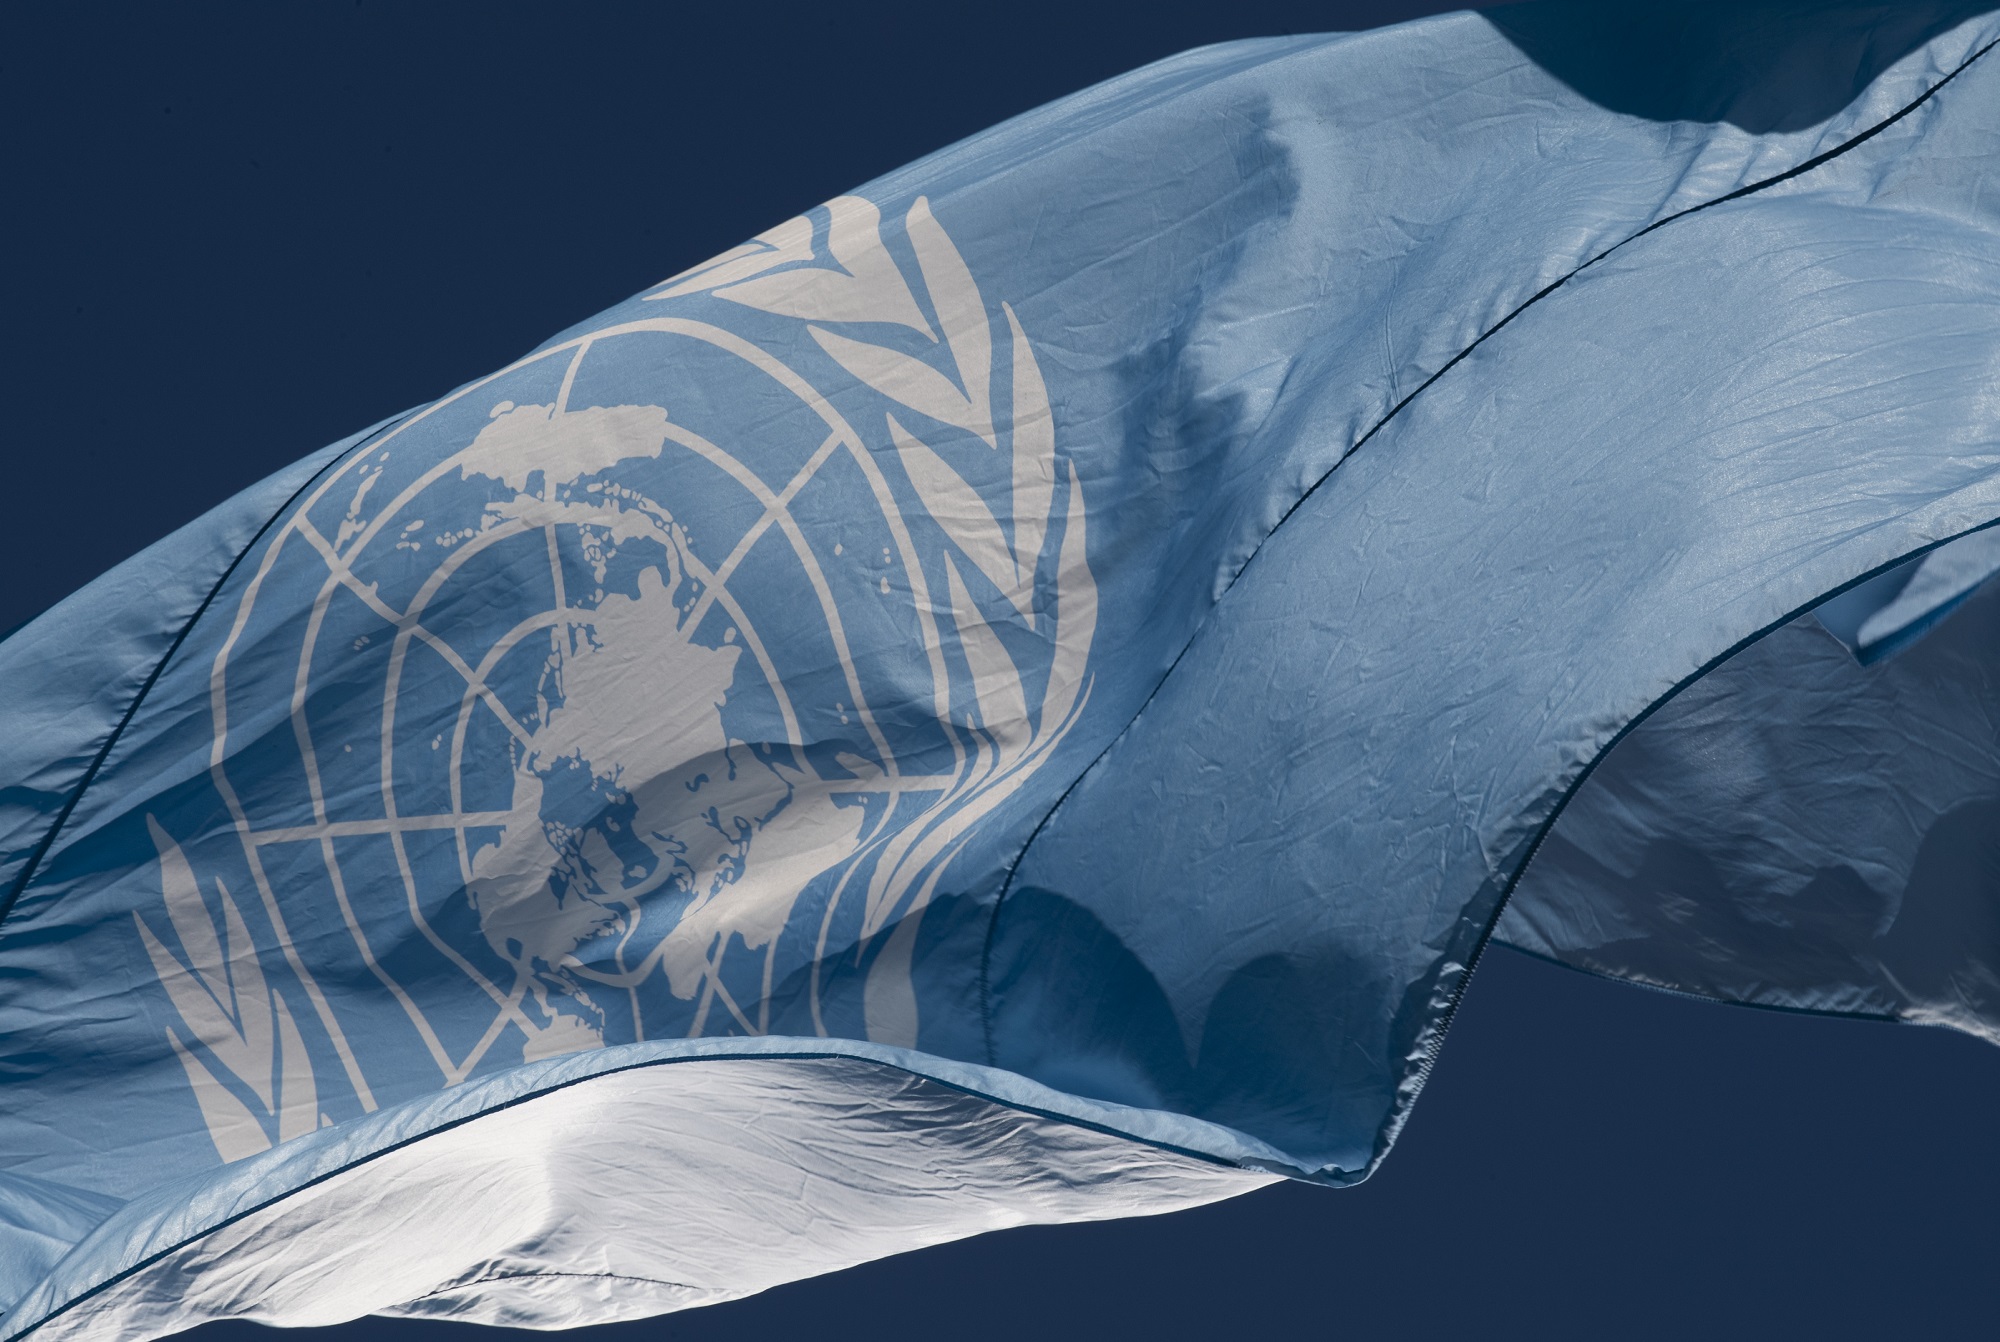 The flag of the United Nations flying -- white emblem on a light blue field.